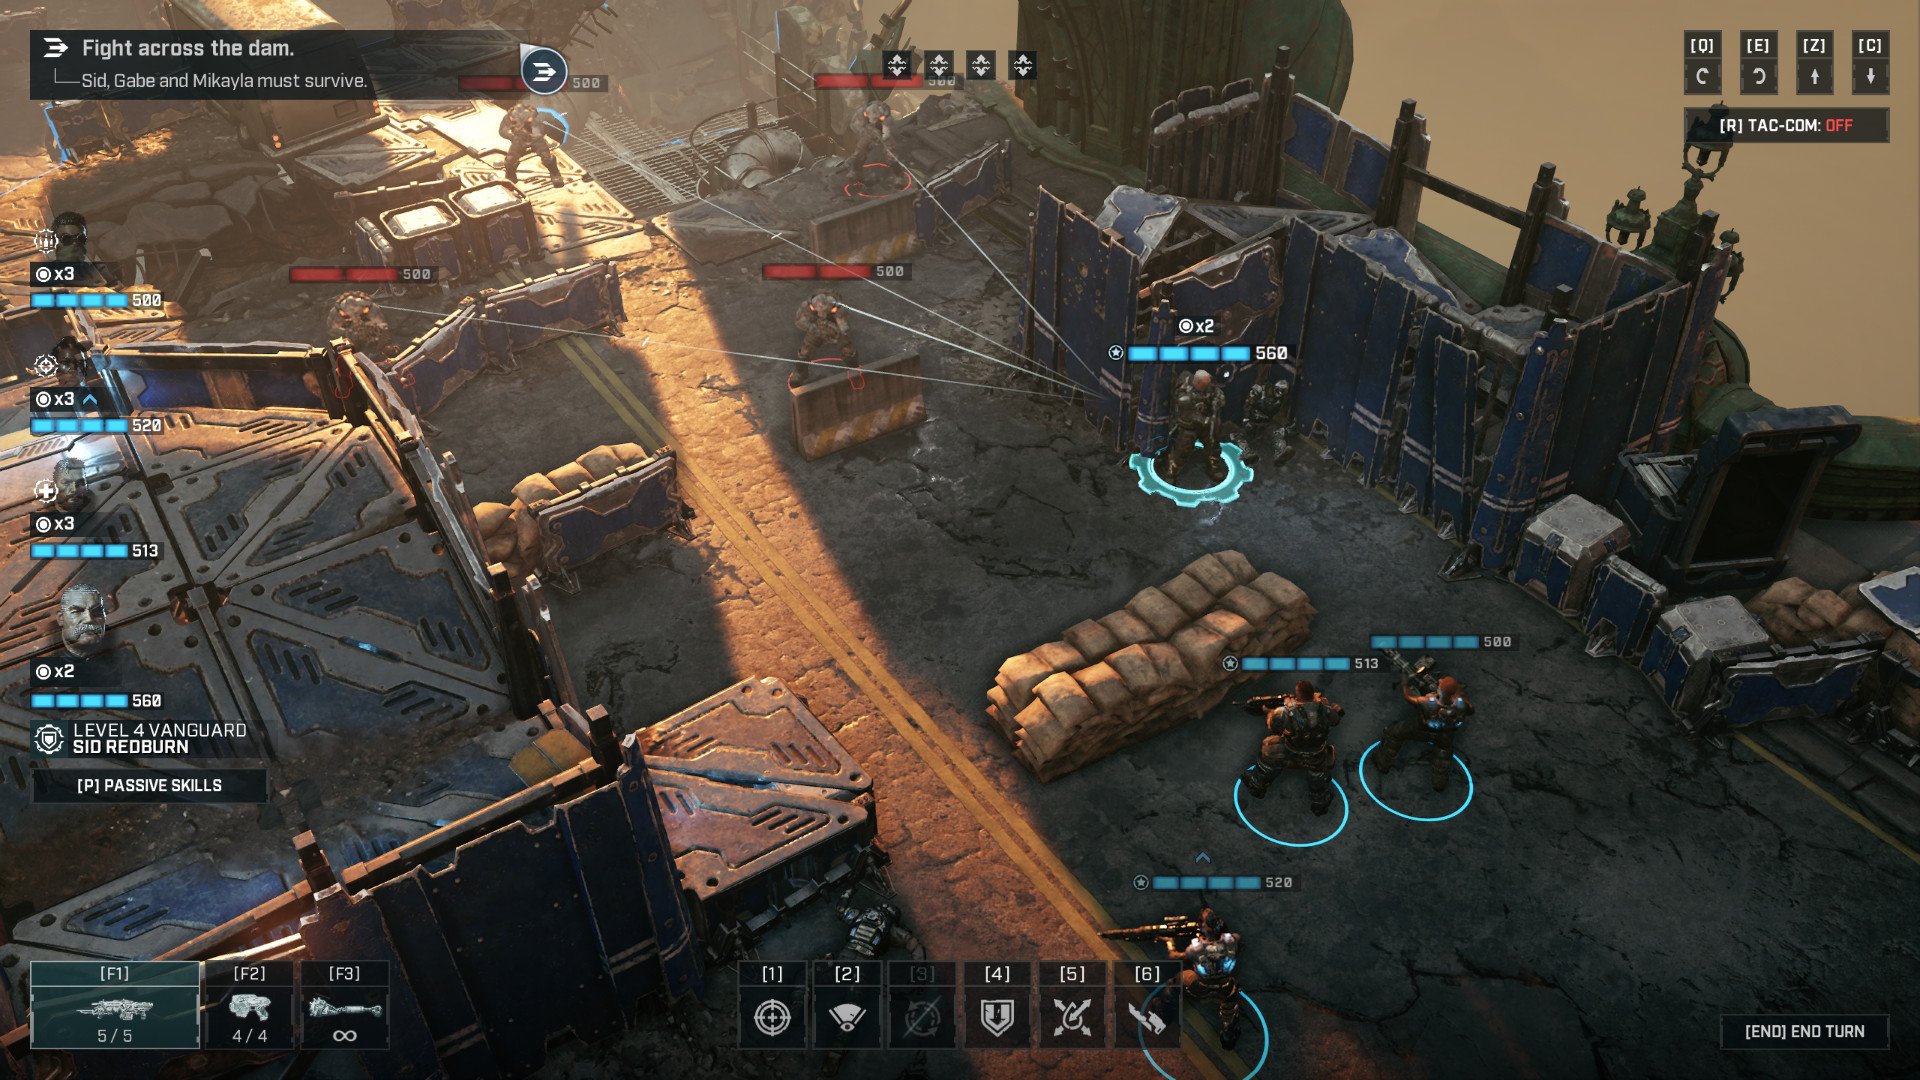 Gears Tactics' weapon mods, skills, and customization must come to